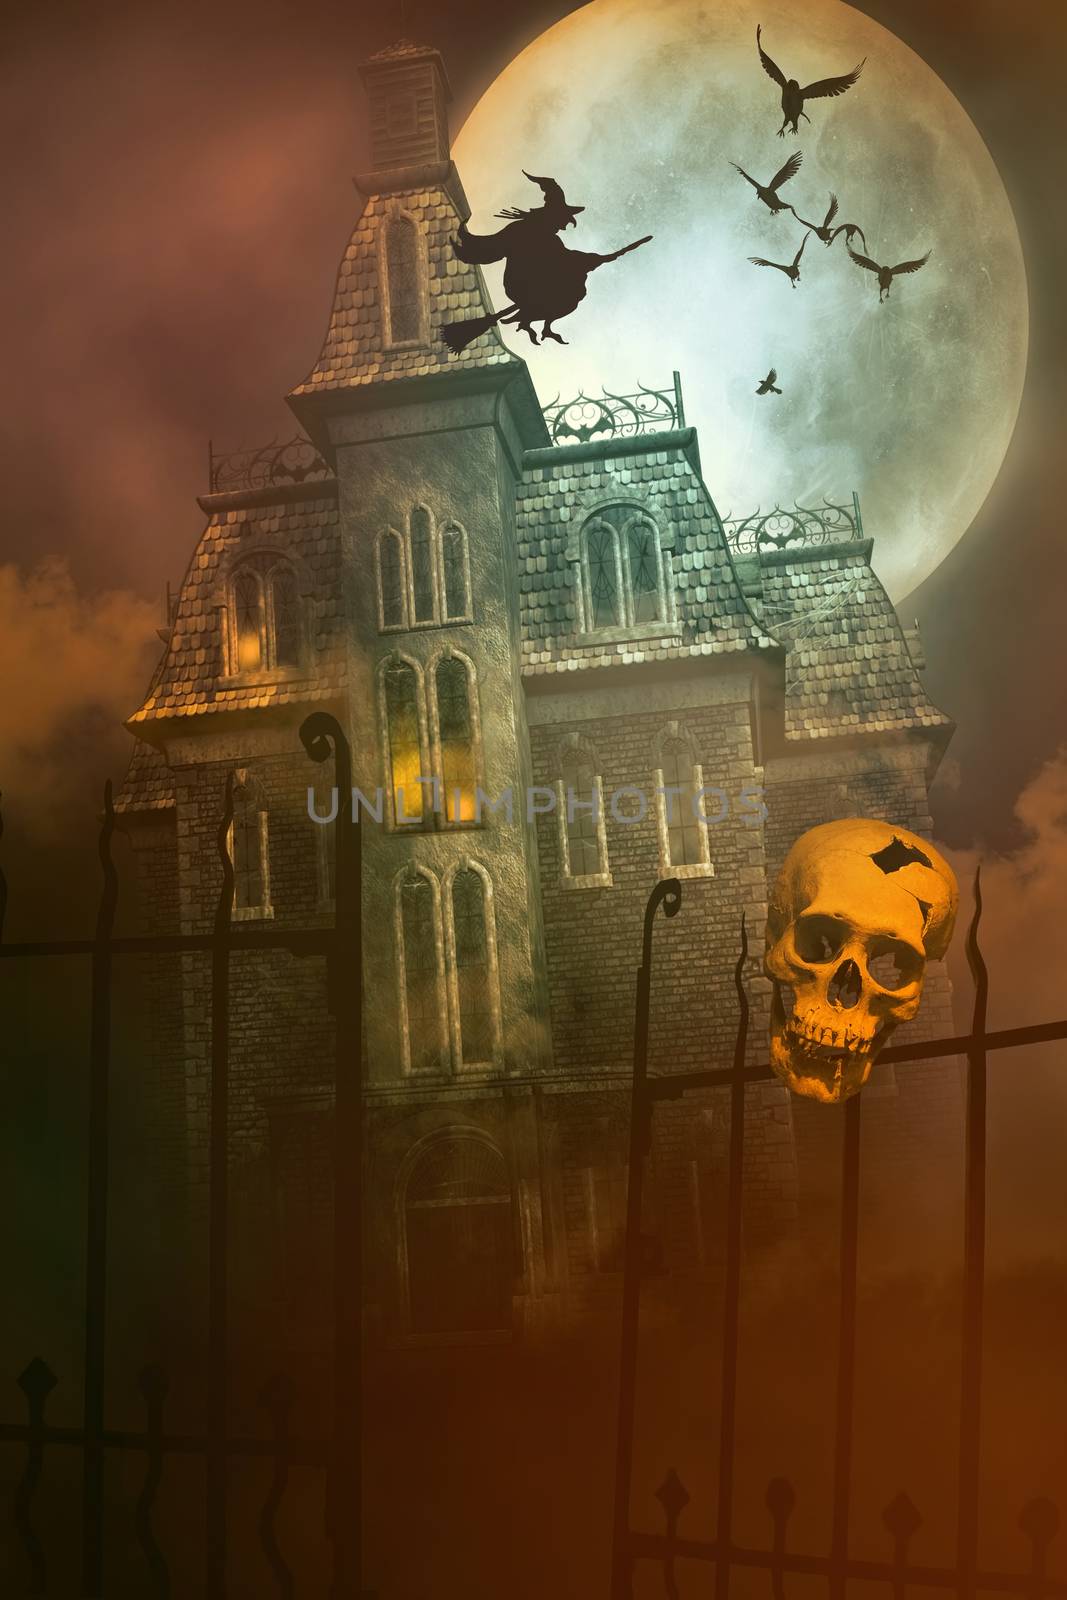 Skulls and Skeletons with creepy house in background by Sandralise